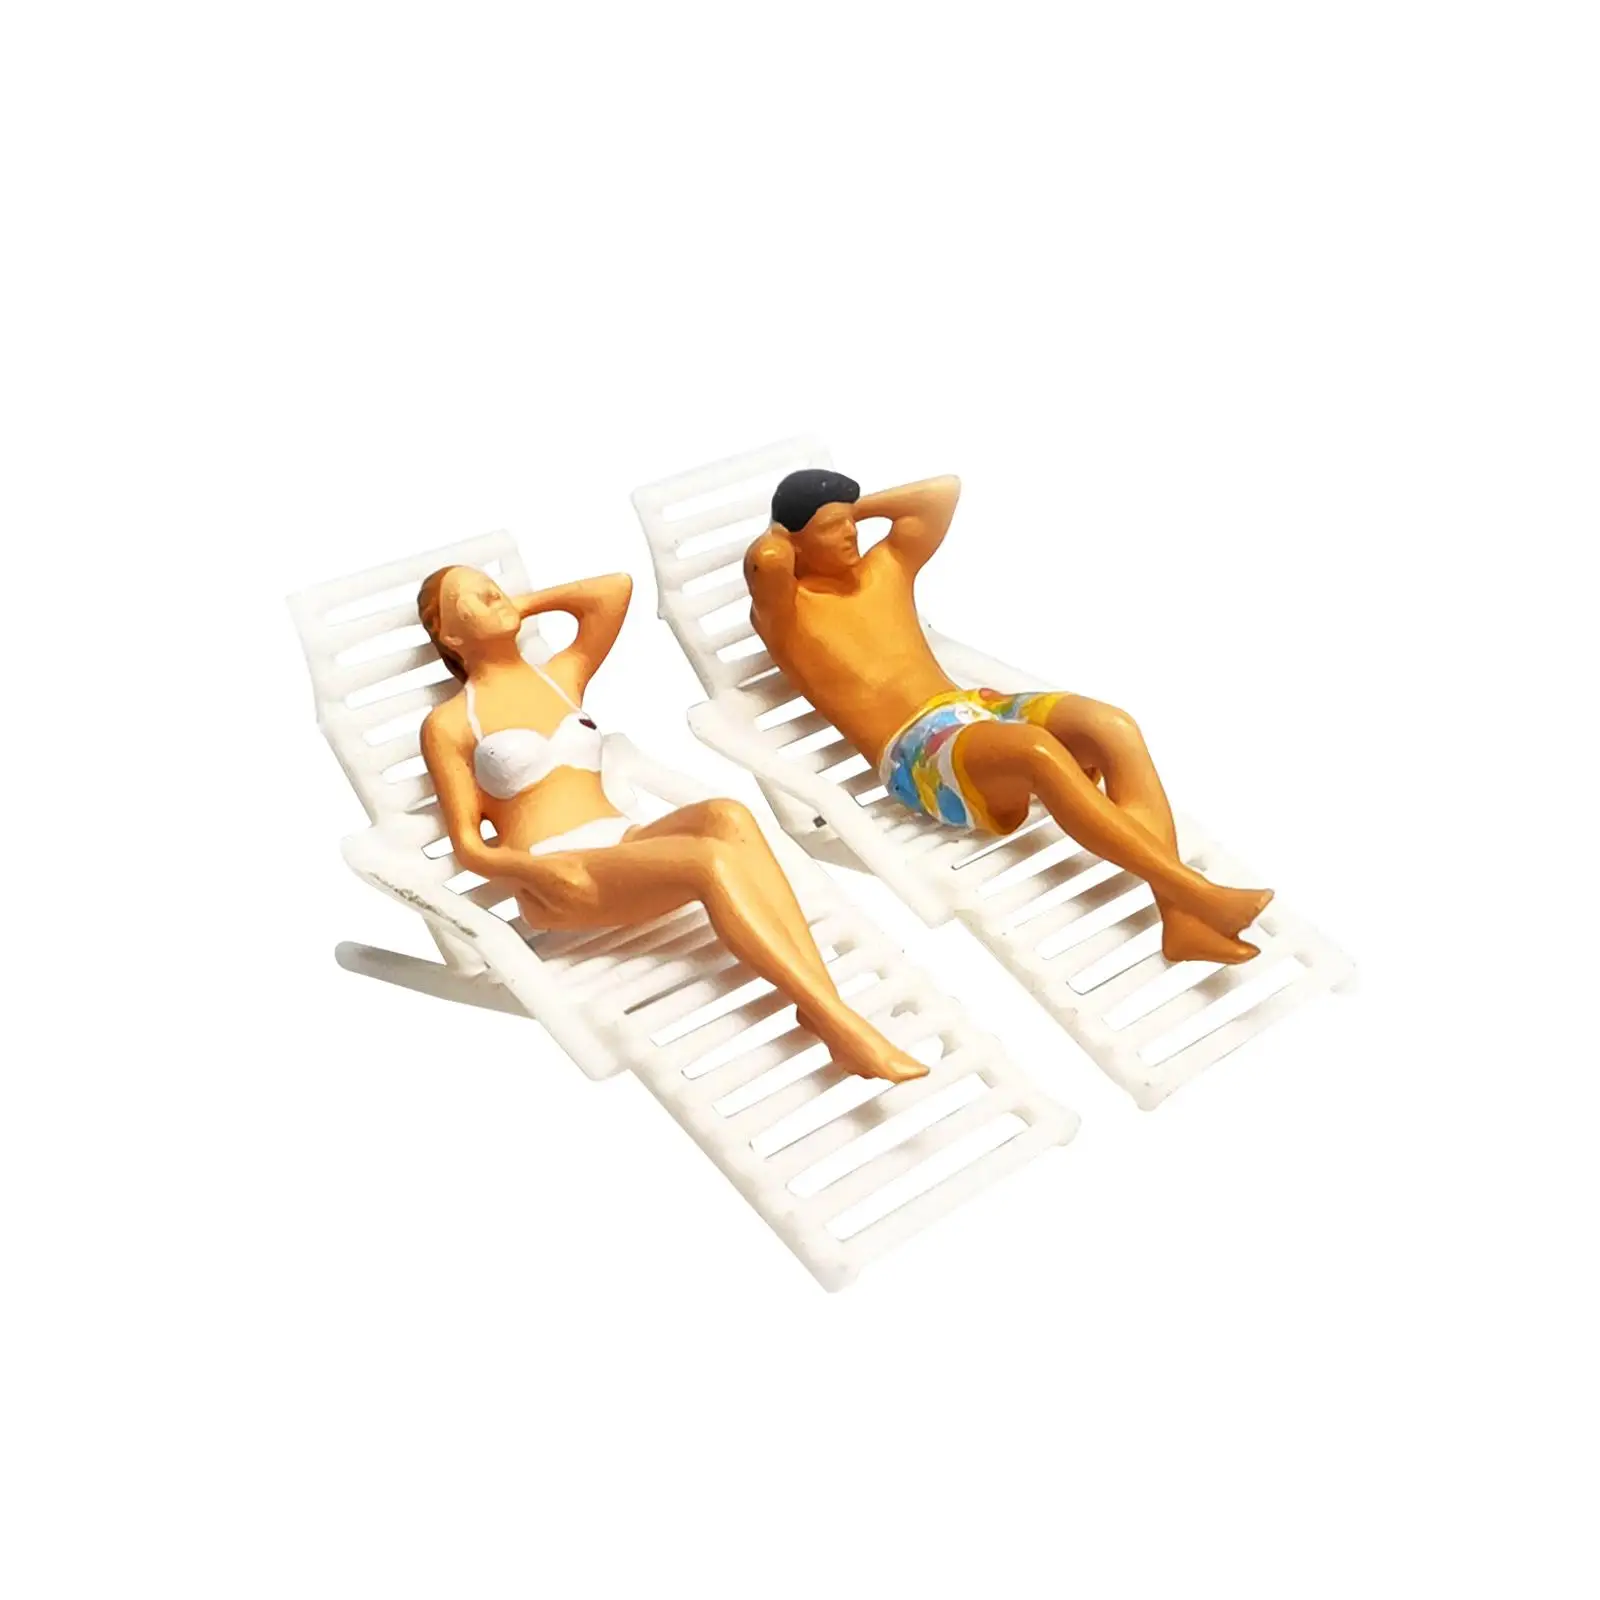 1/64 Scale People Figures Set Tiny People for DIY Projects Sand Table Layout